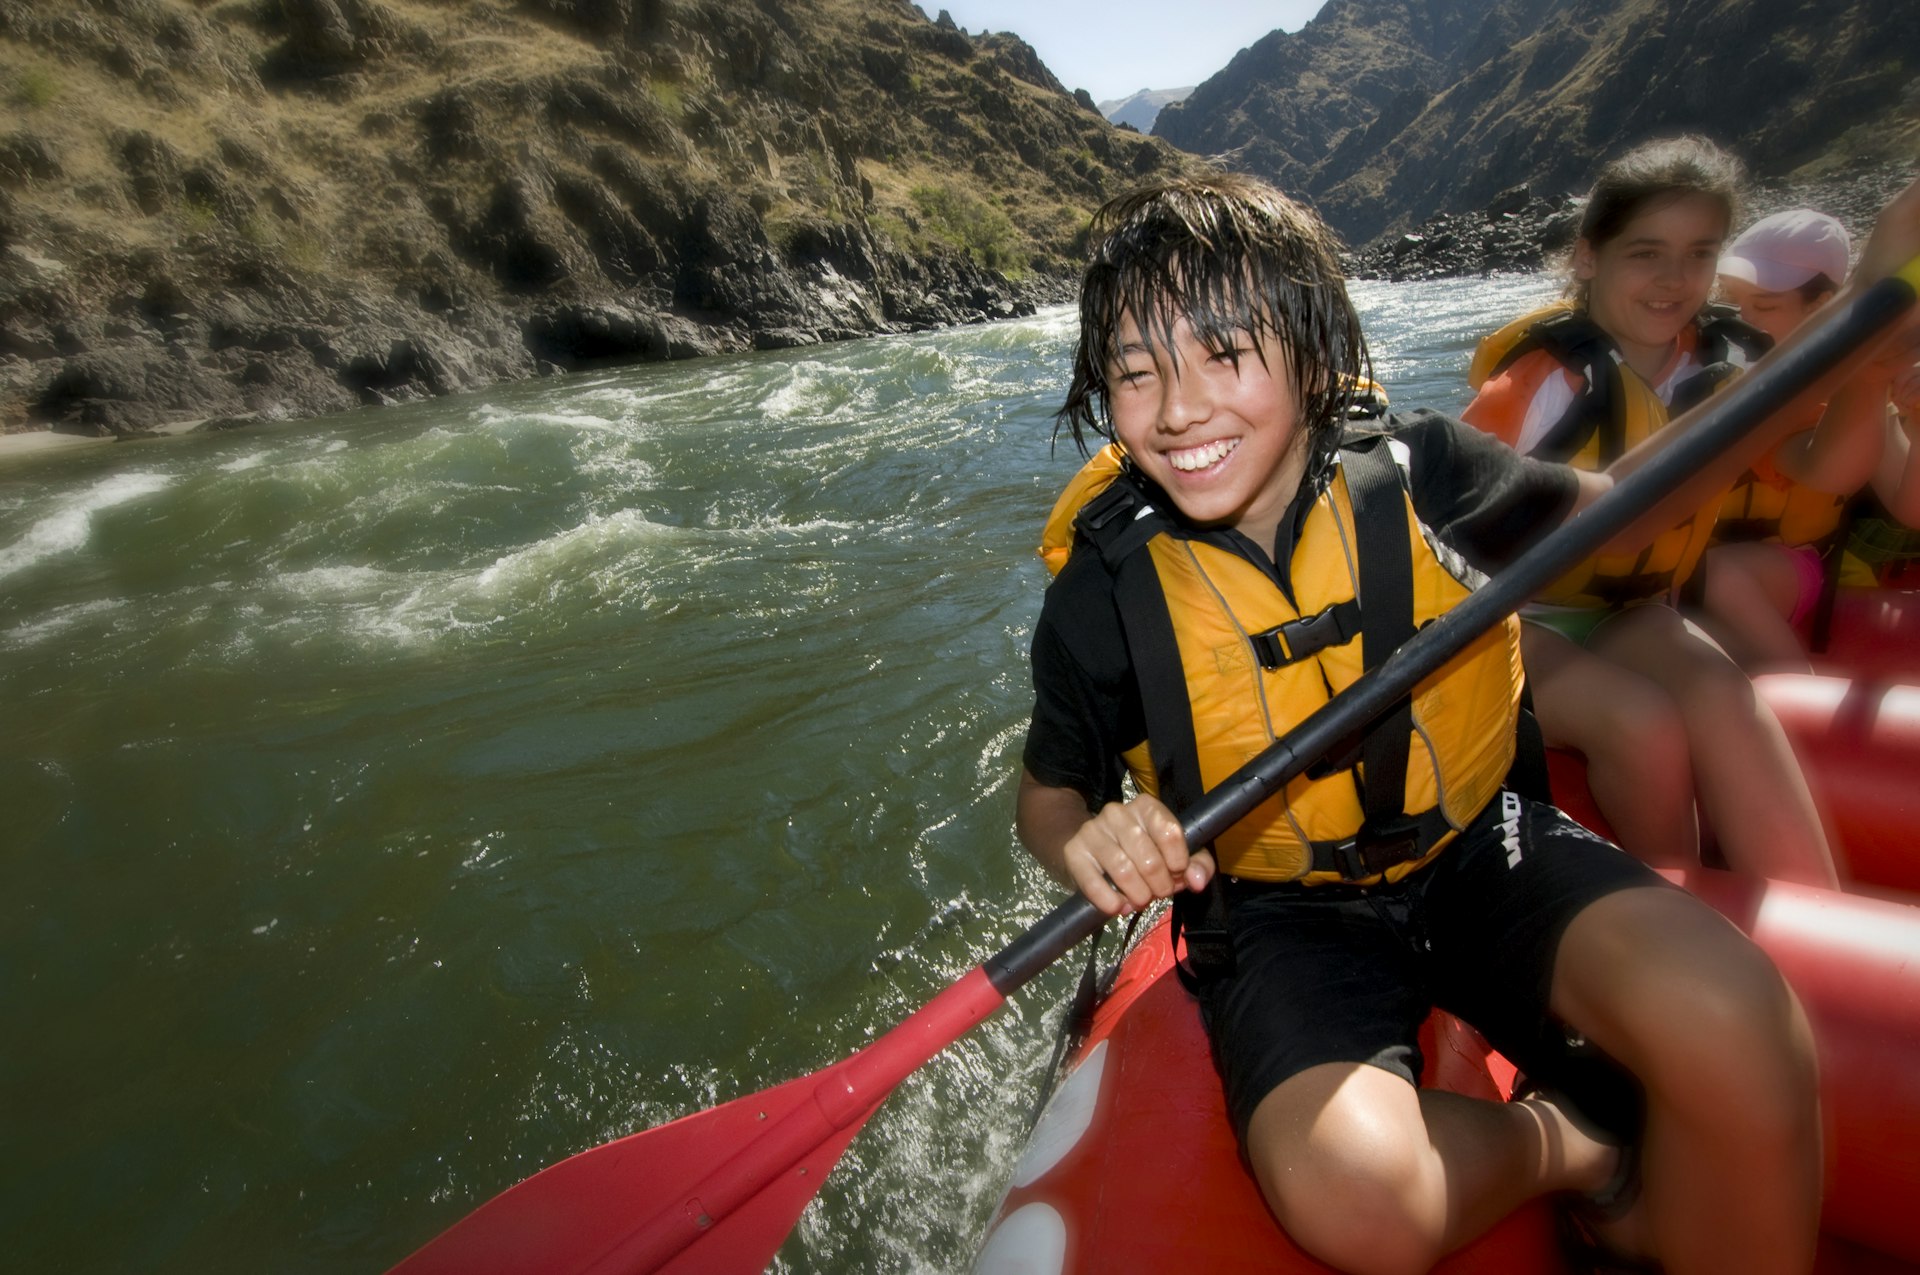 A boy smiles as he rows in a whitewater raft down a canyon river in the USA